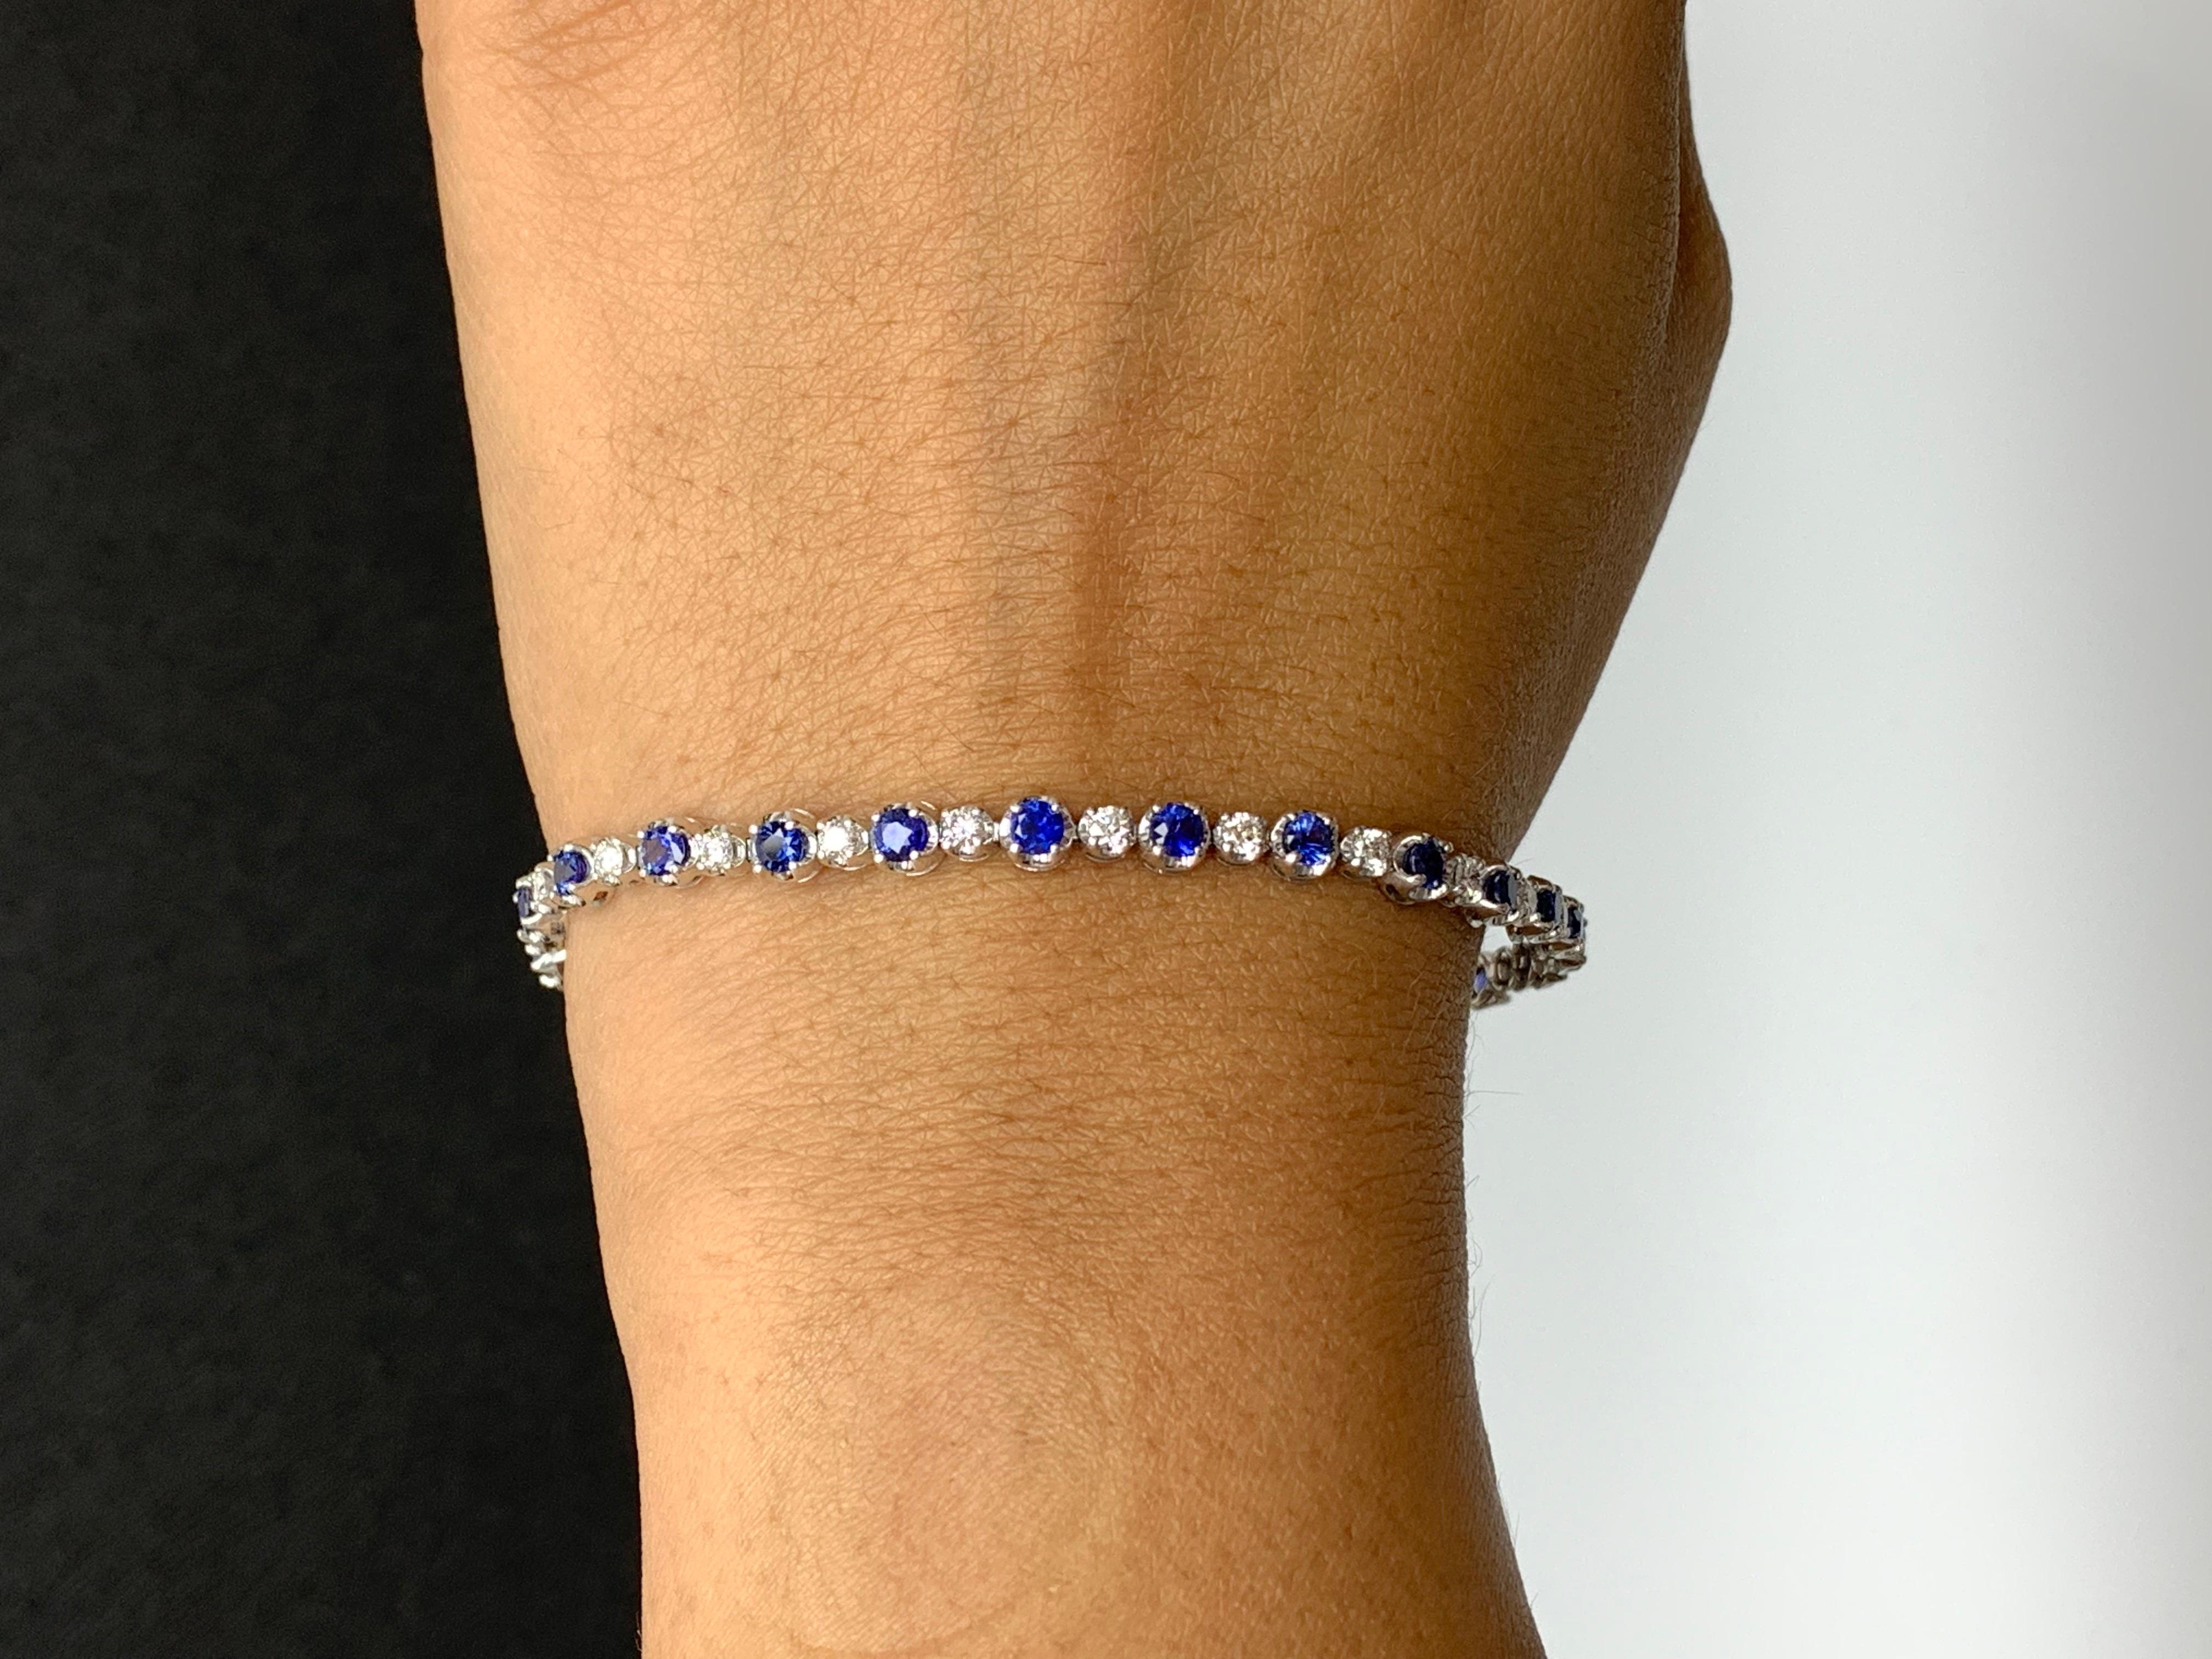 2.96 Carat Round Blue Sapphire and Diamond Bracelet in 14k White Gold For Sale 6